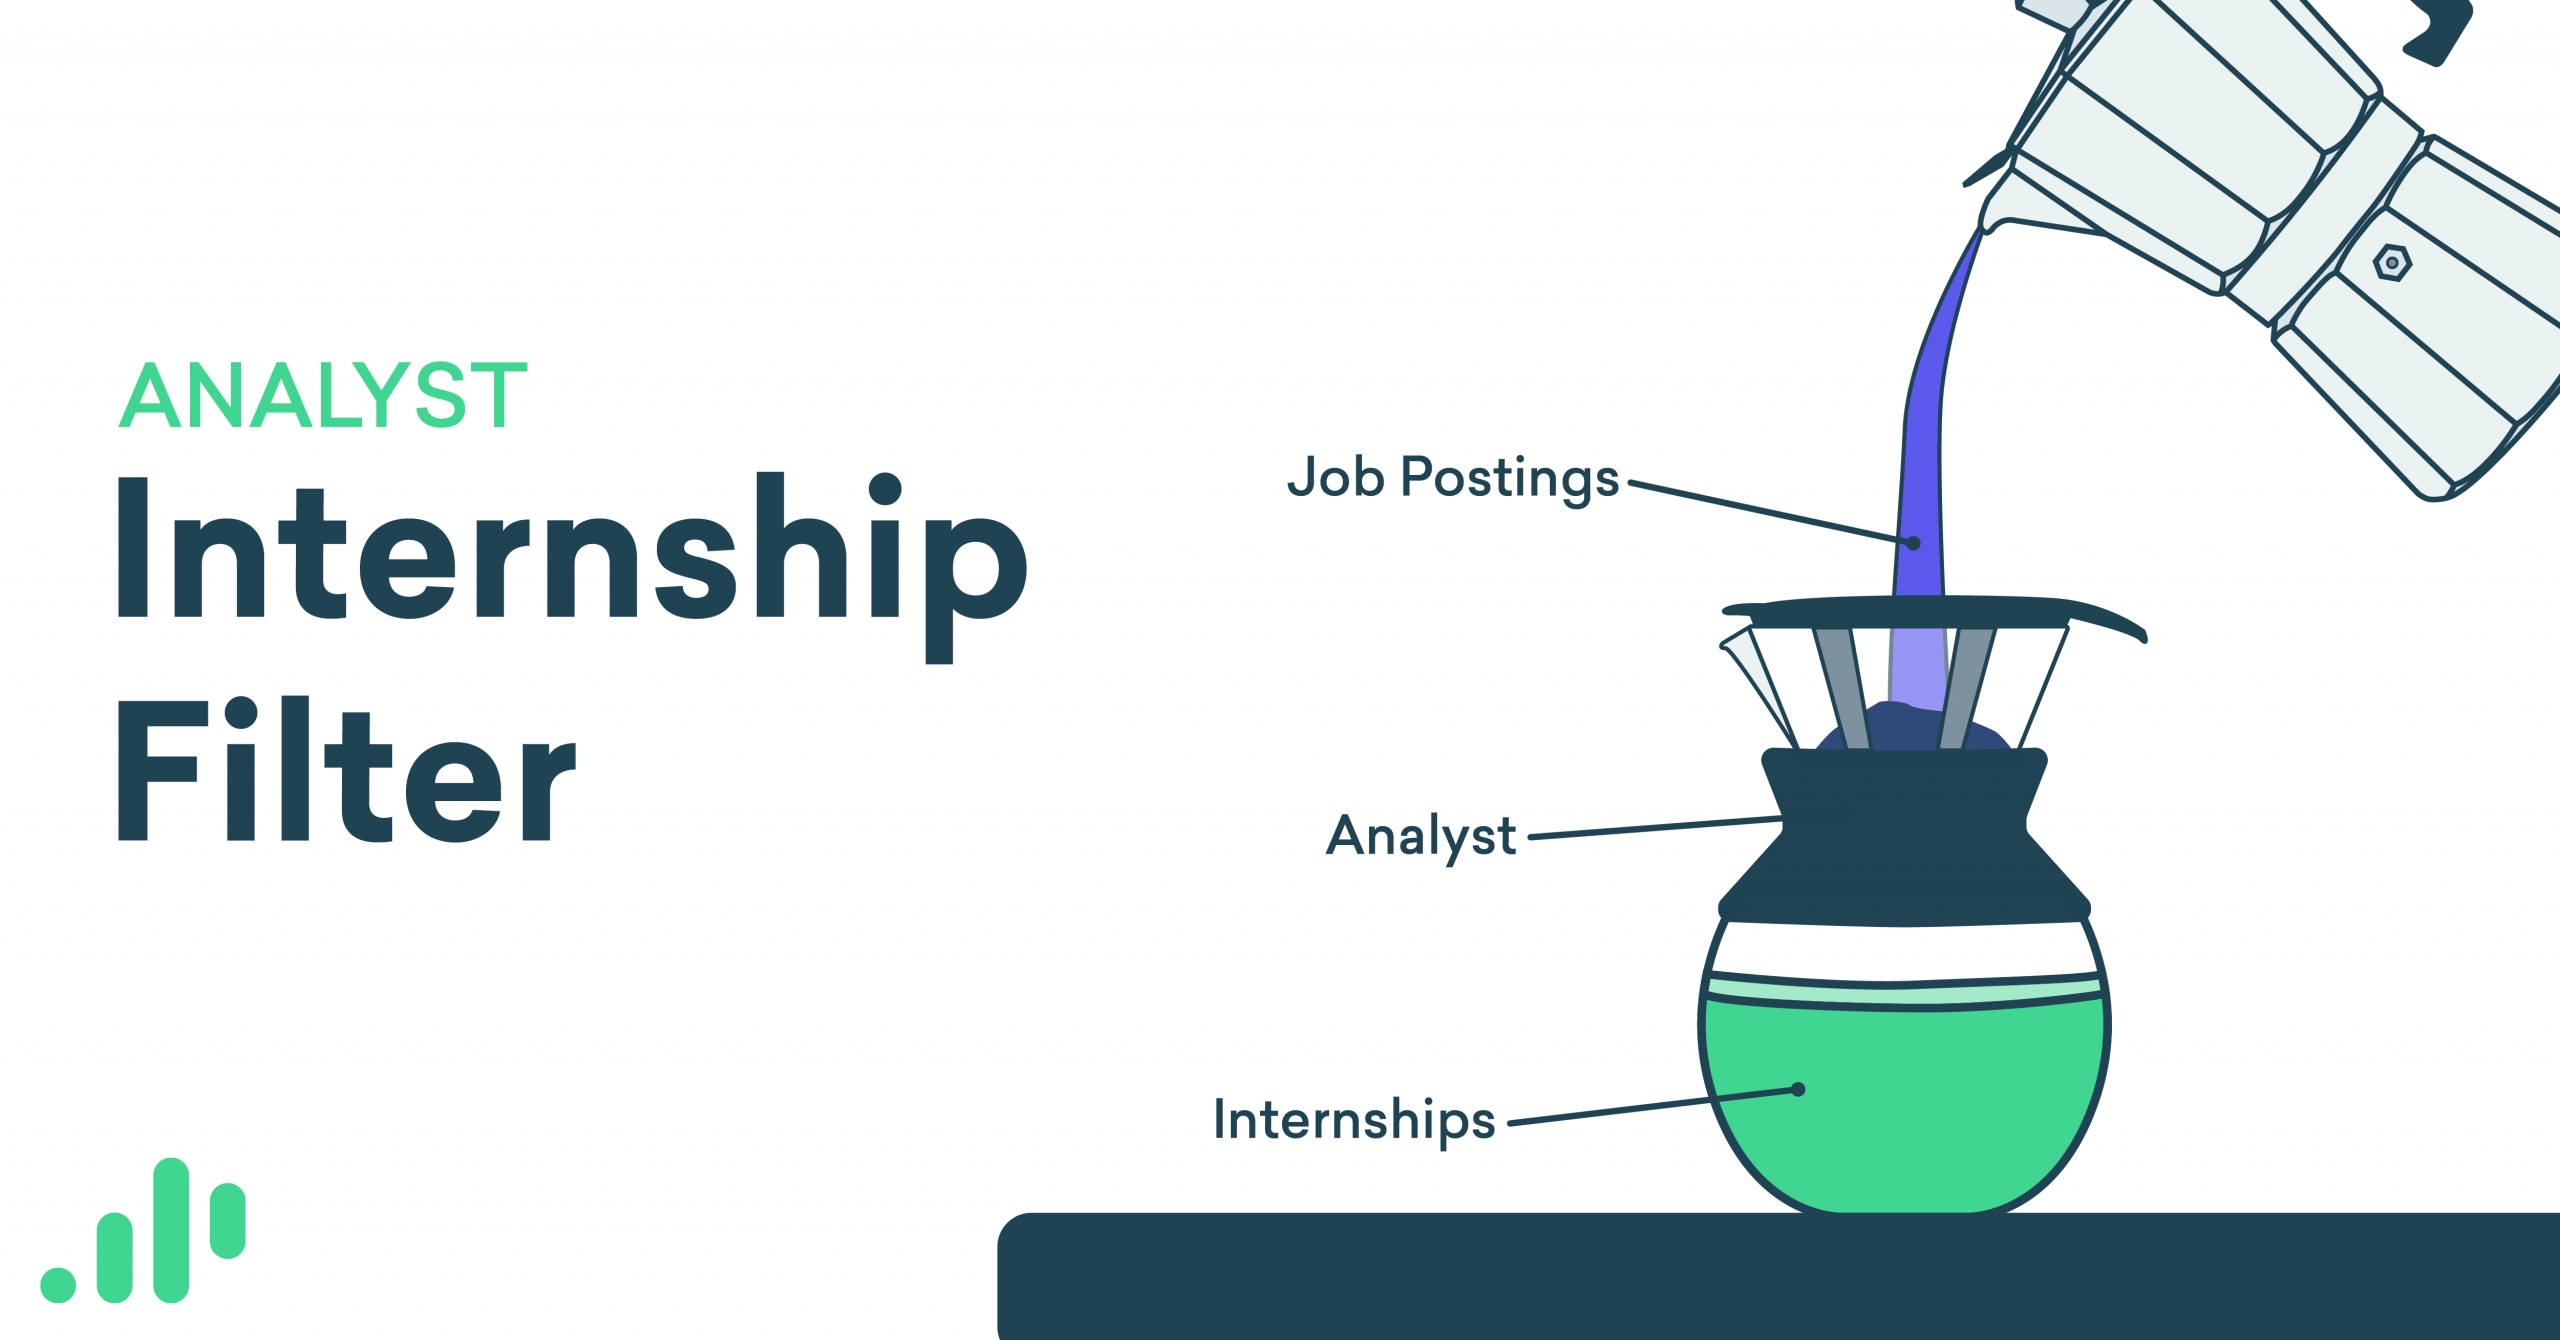 Discover Internship Opportunities within Analyst’s Job Postings Data